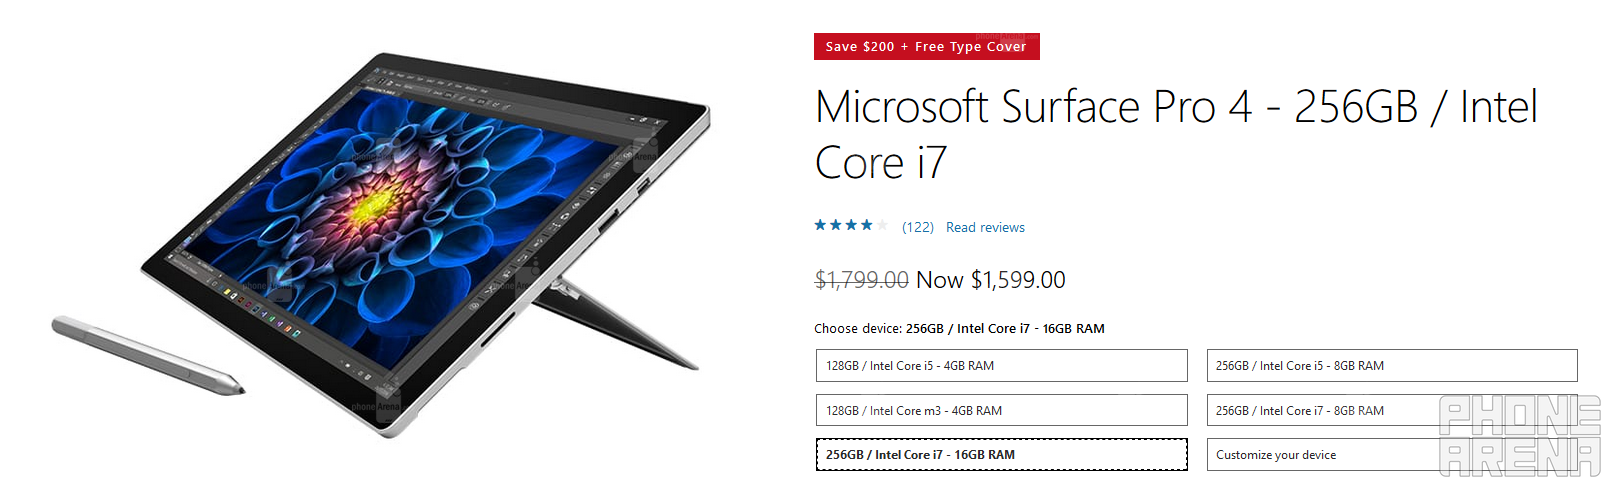 Save $200 and get a free Type Cover with the purchase of certain Surface Pro 4 tablets from the Microsoft Store - Last day of Microsoft&#039;s 12 Days of Deals brings a $200 Surface Pro 4 discount and a free Type Cover